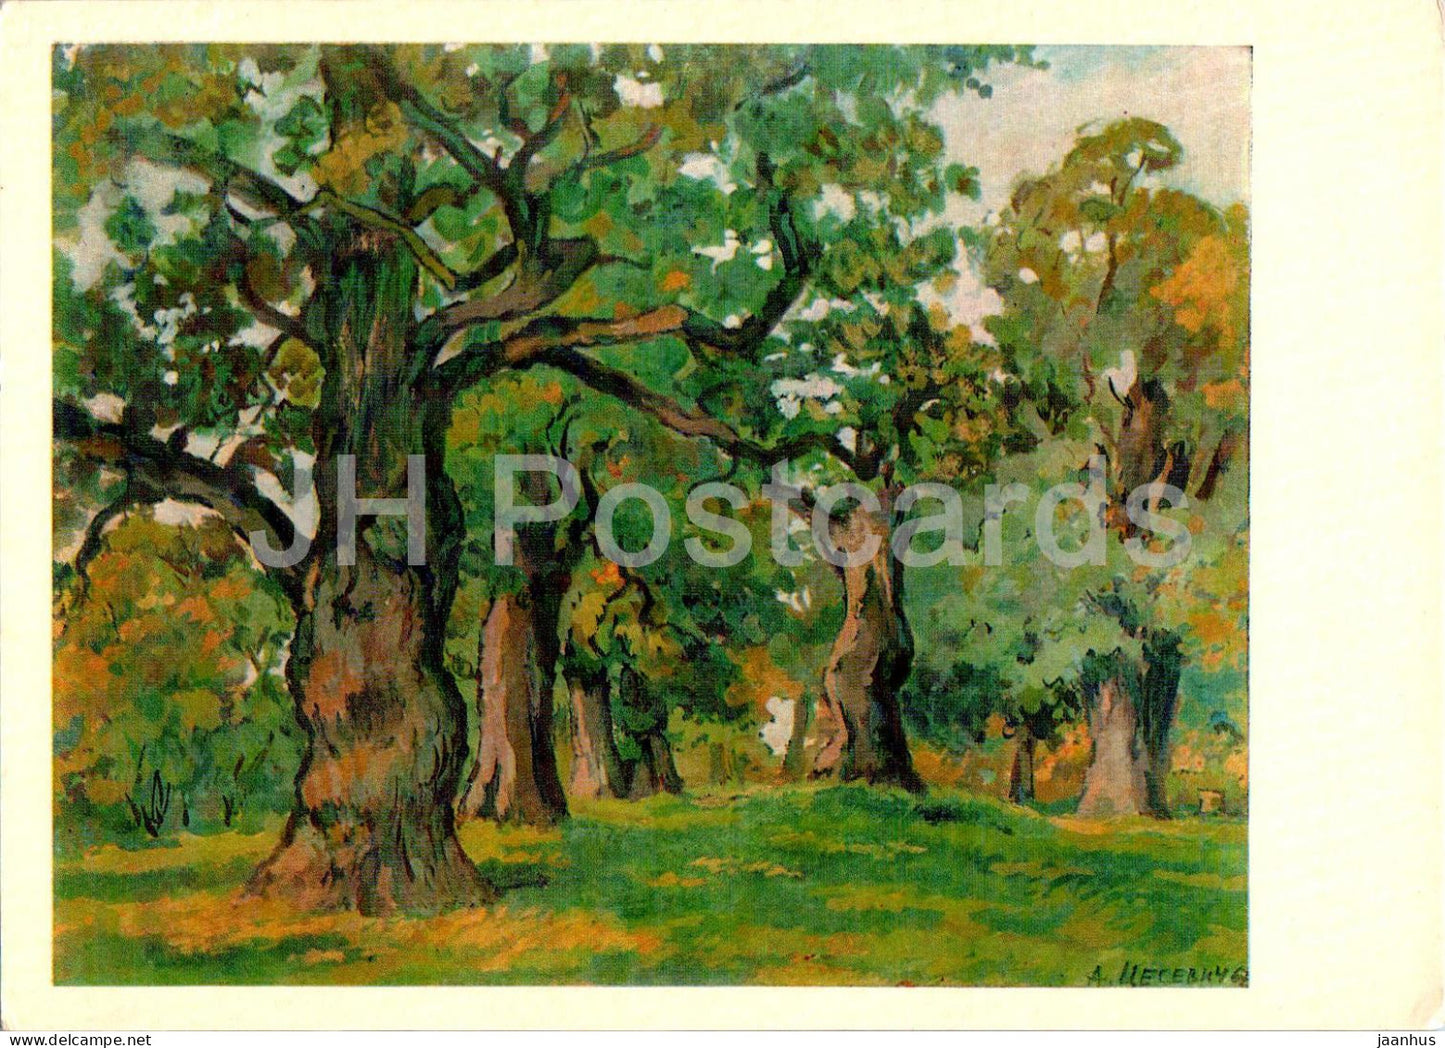 Kolomenskoye - Old Park with 800 Year old Oaks - illustration by A. Tsesevich - 1972 - Russia USSR - unused - JH Postcards